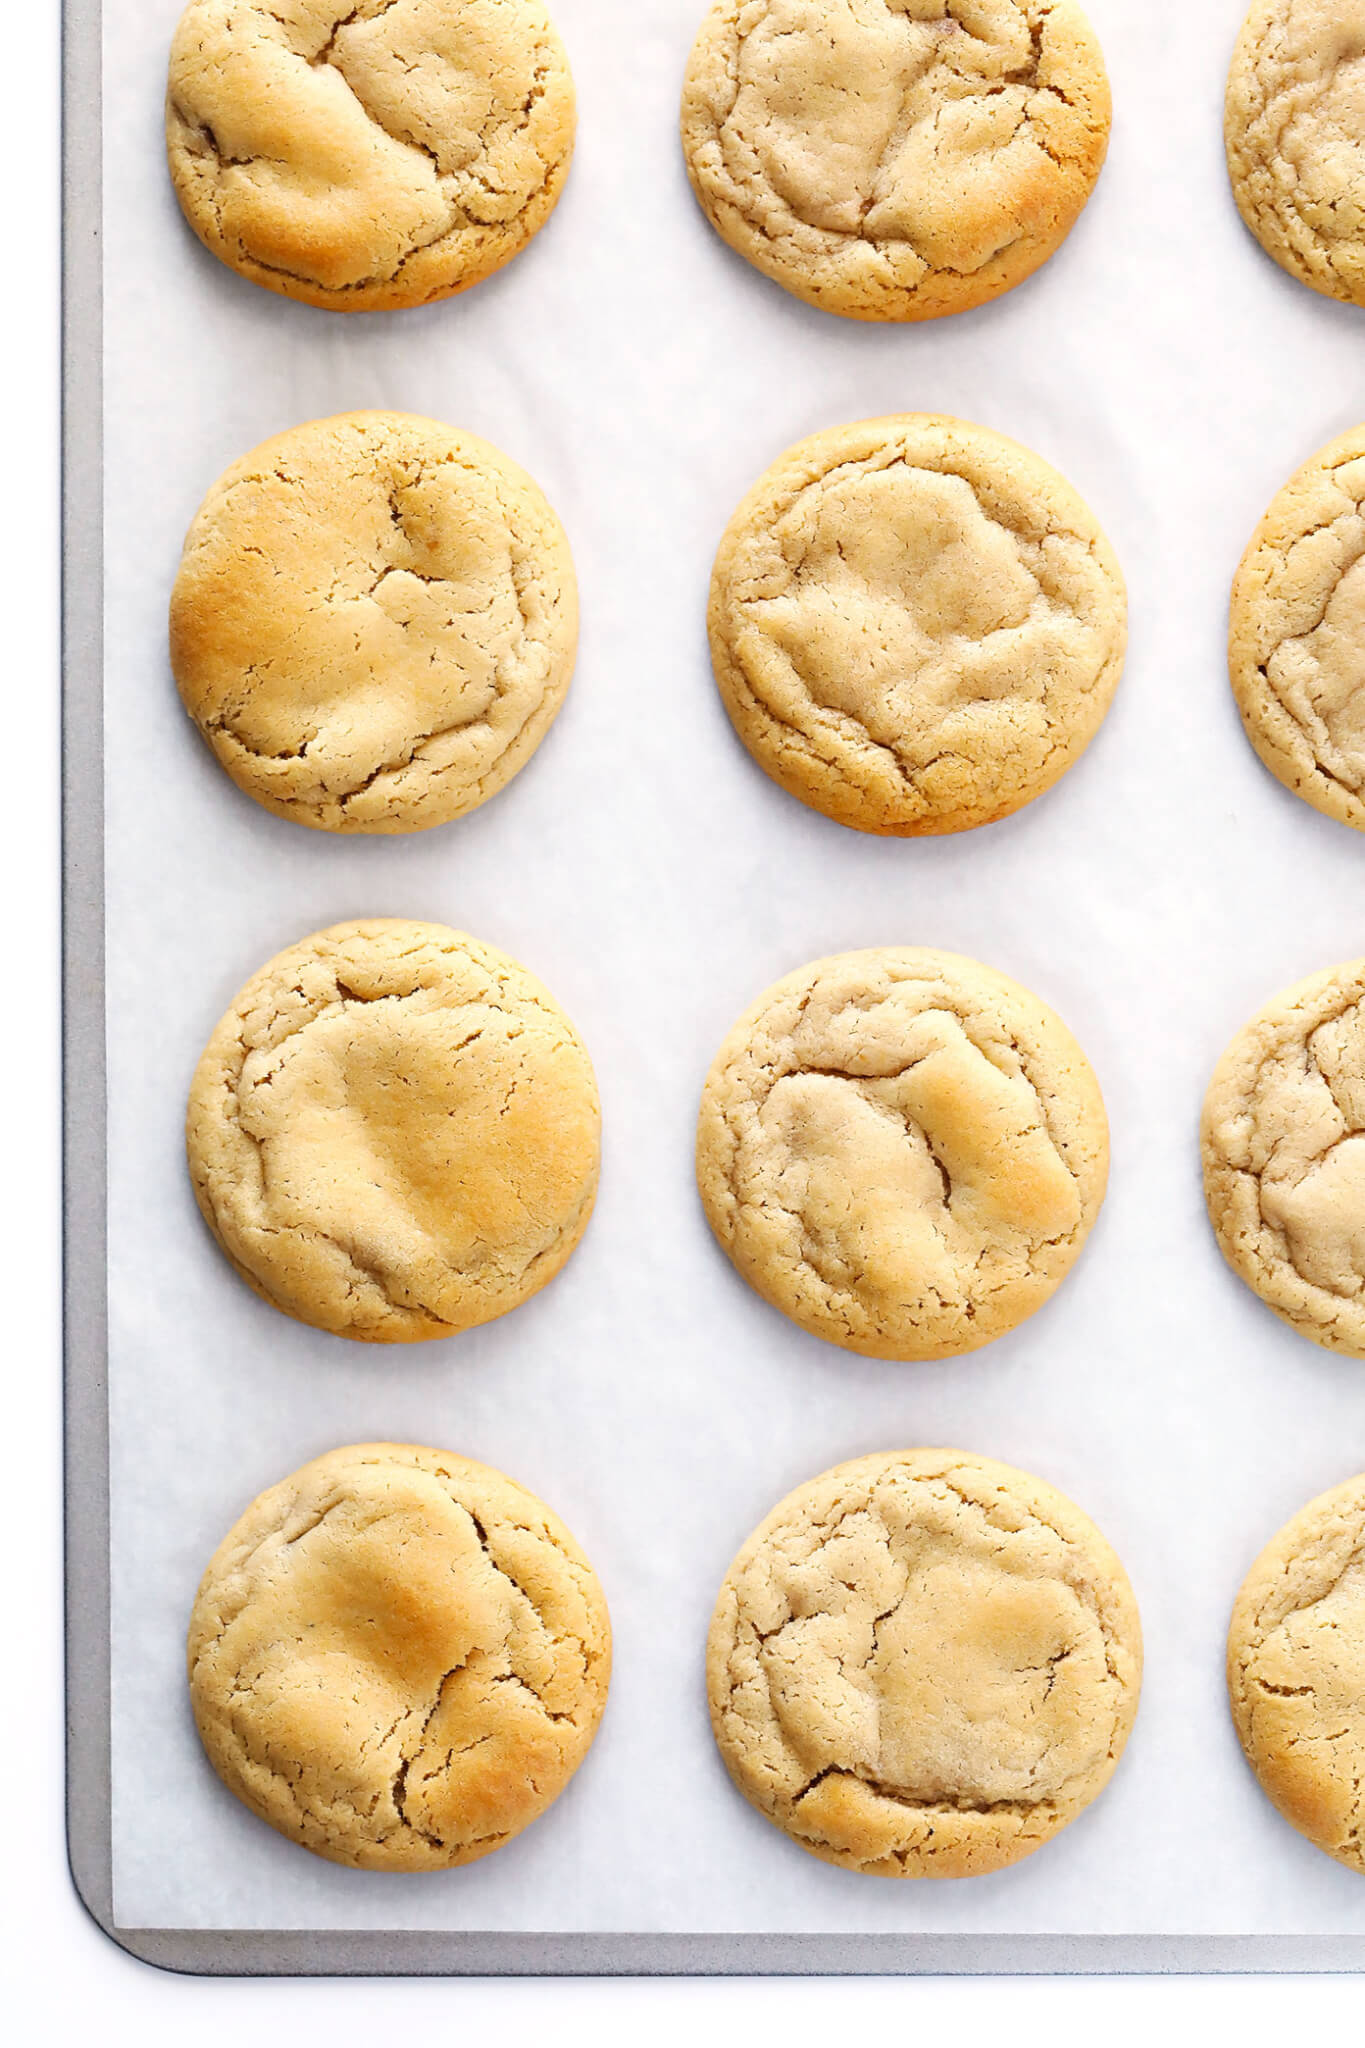 These soft and chewy Chocolate "Chip-Less" Cookies are everything you love about traditional CCCs...just without the chocolate chips! So delicious, especially when sprinkled with flaked sea salt. | gimmesomeoven.com (Dessert | Vegetarian)